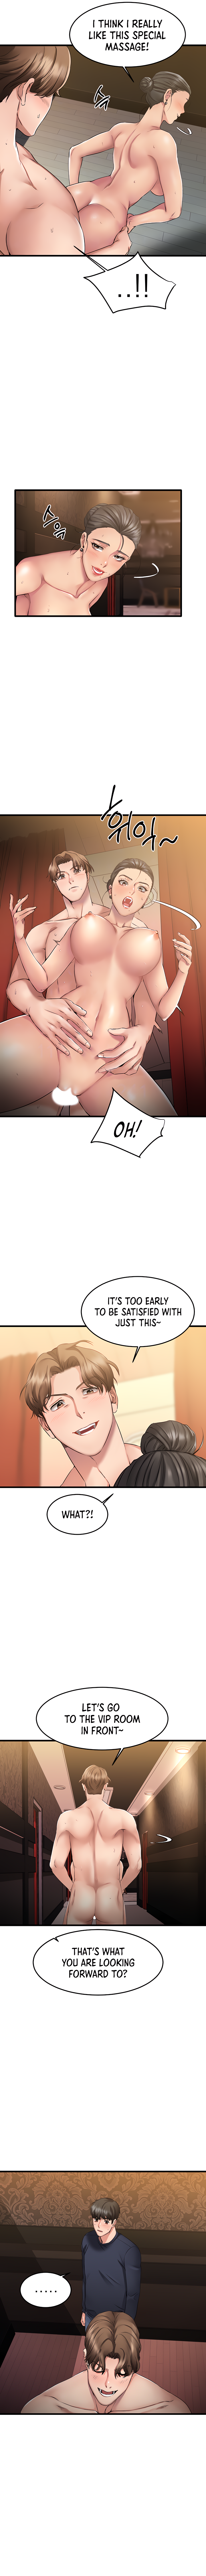 my-female-friend-who-crossed-the-line-chap-3-3